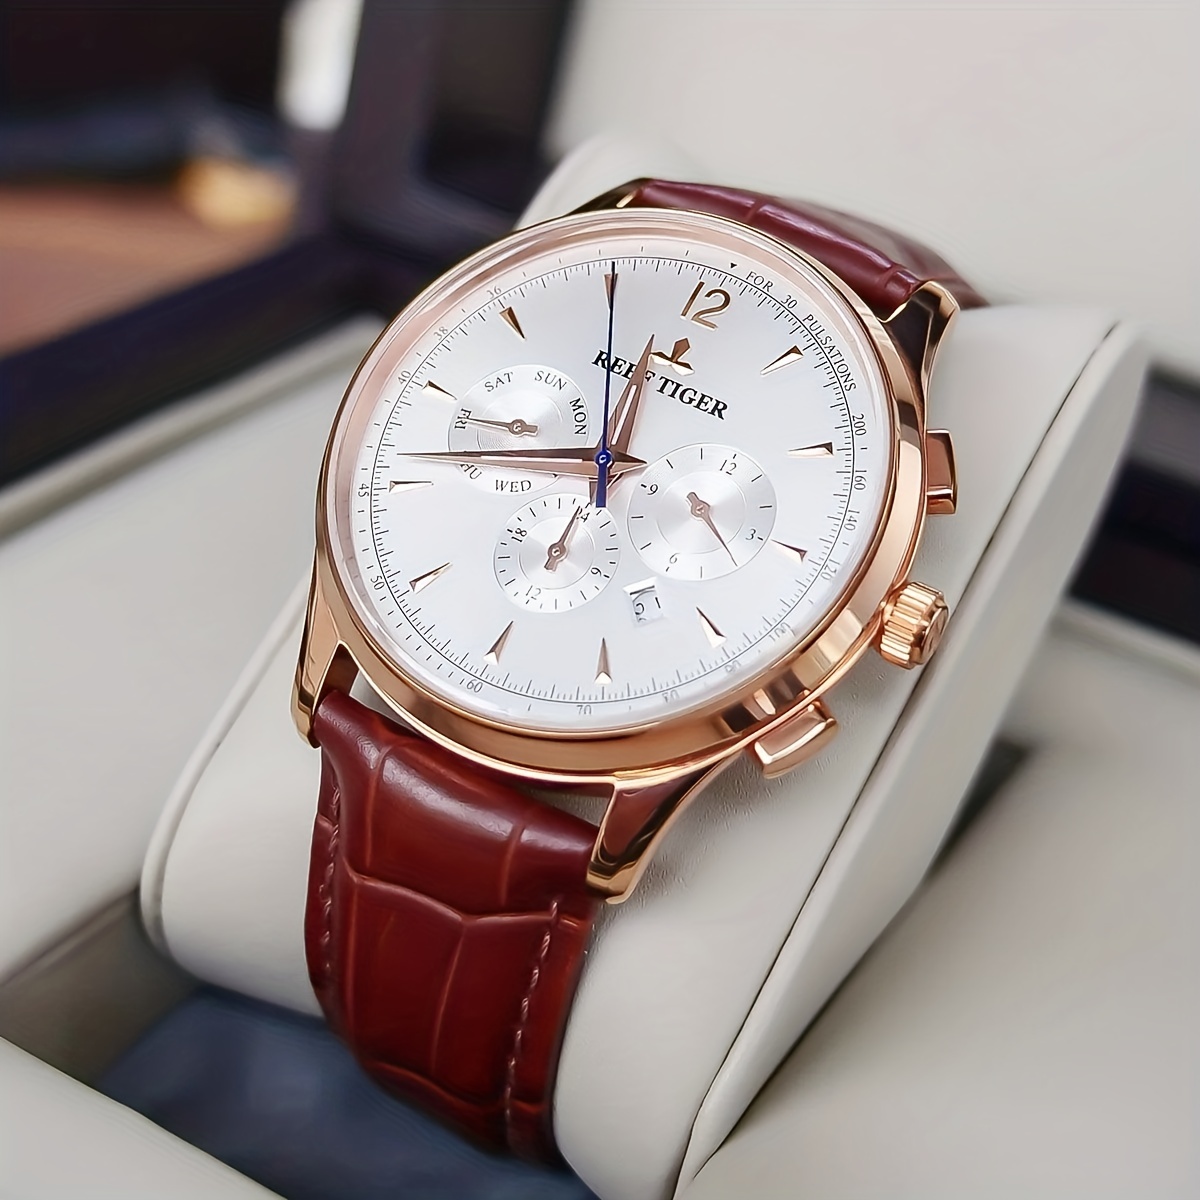 Men's Rose Gold Watches, Vincero Watches